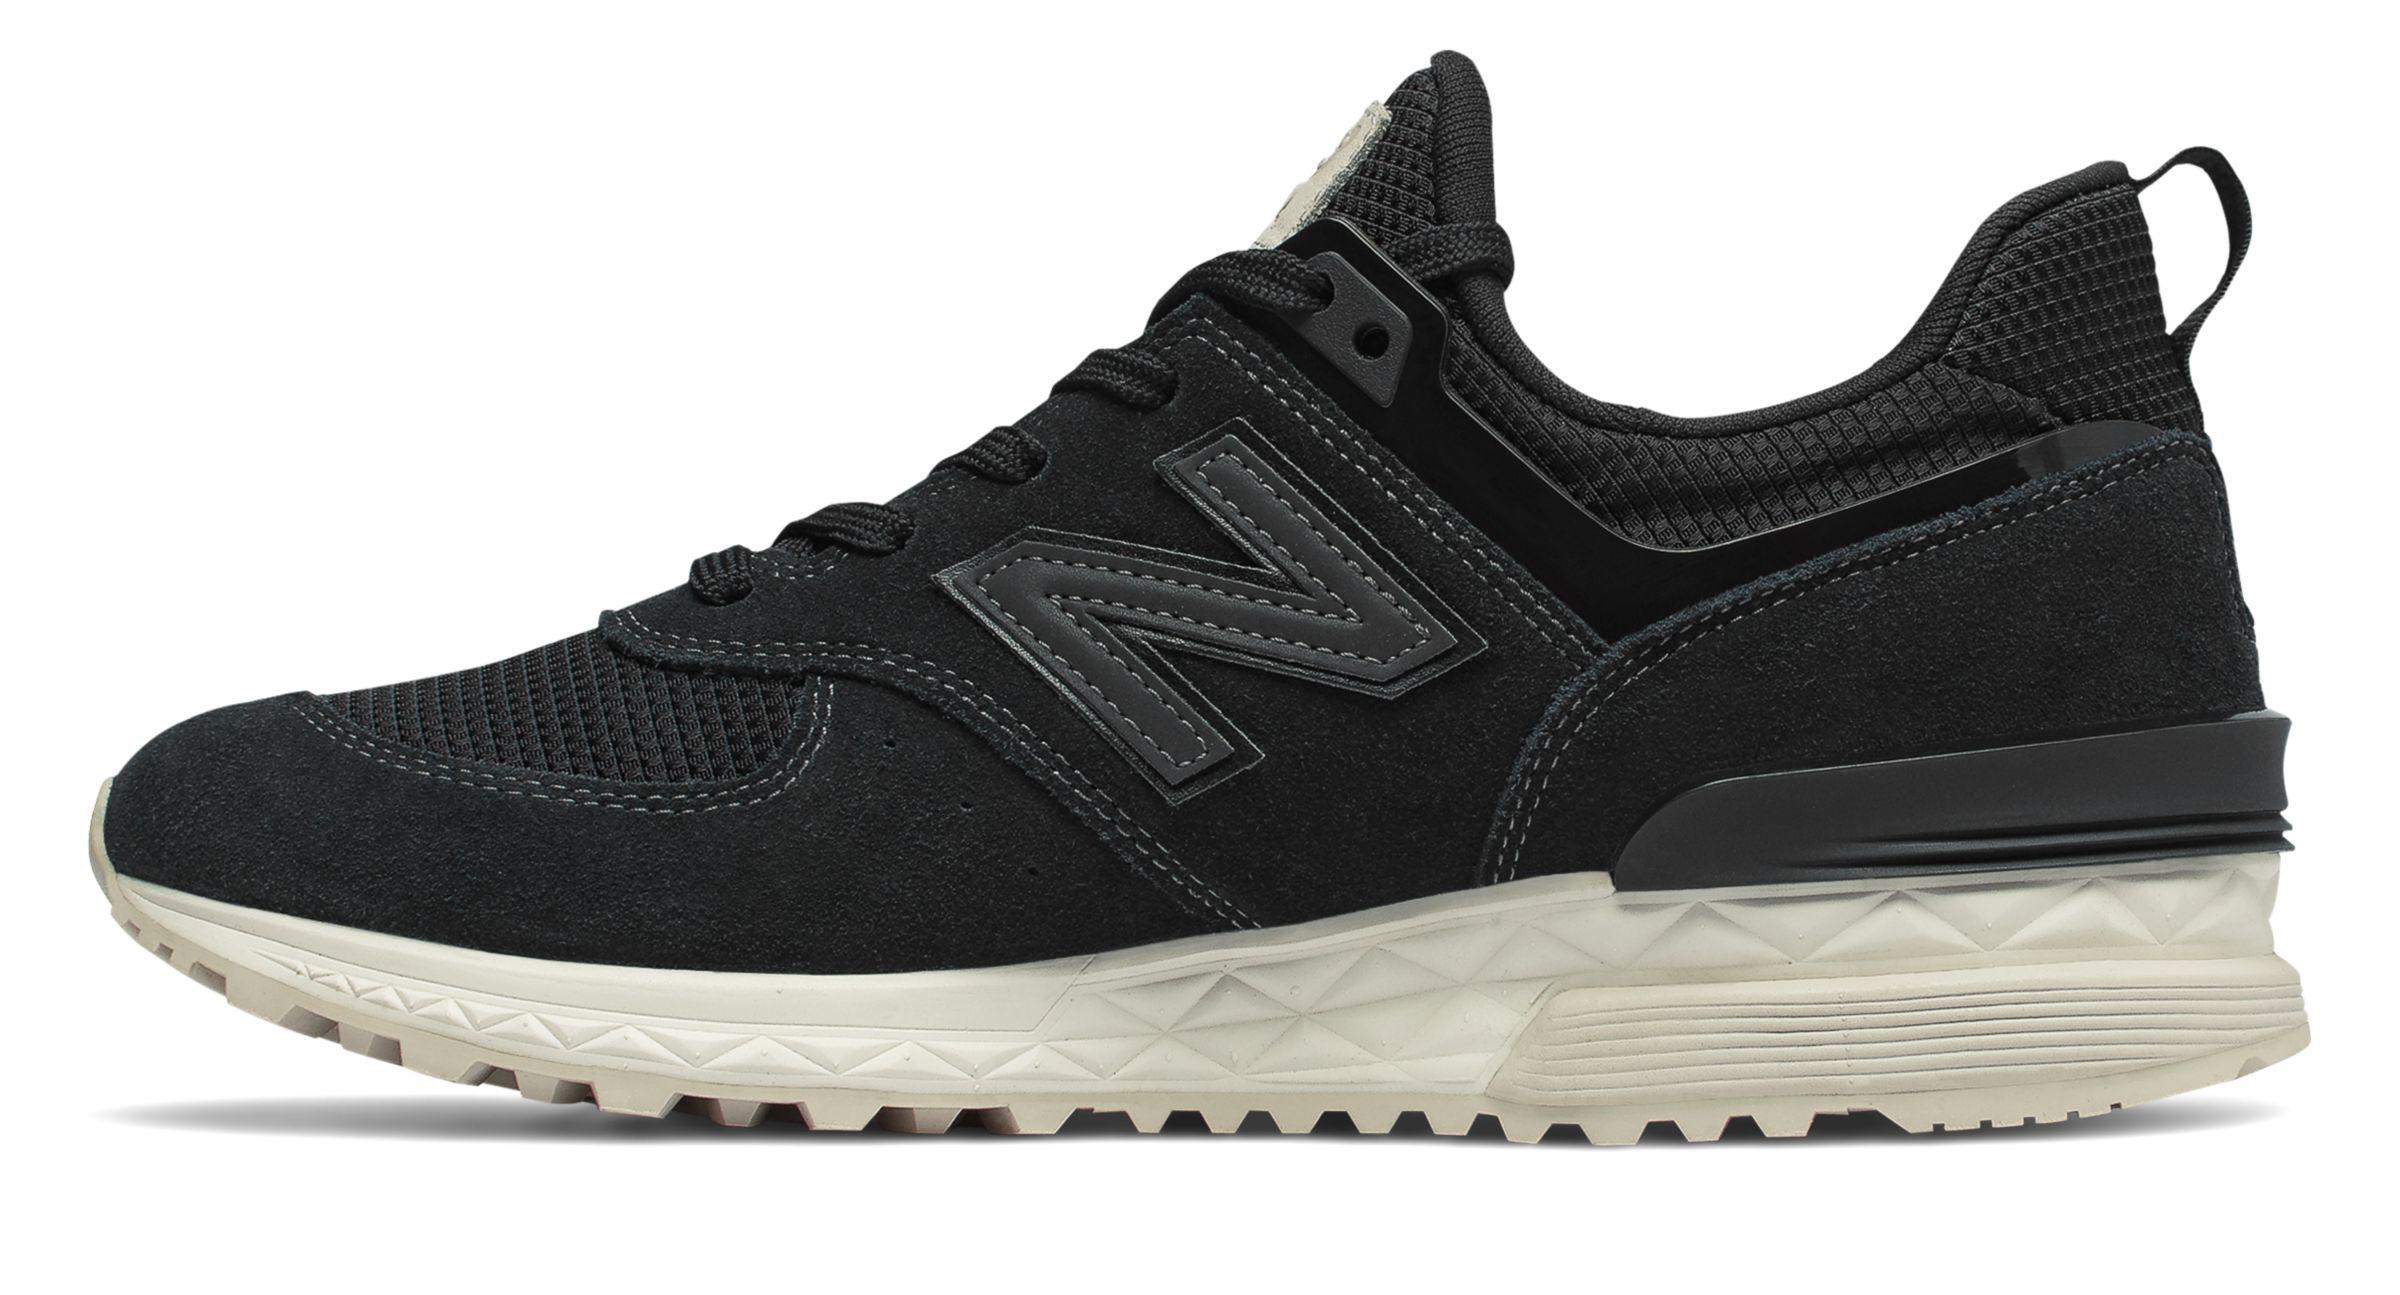 New Balance Rubber New Balance 574 Sport Shoes in Black for Men - Lyst